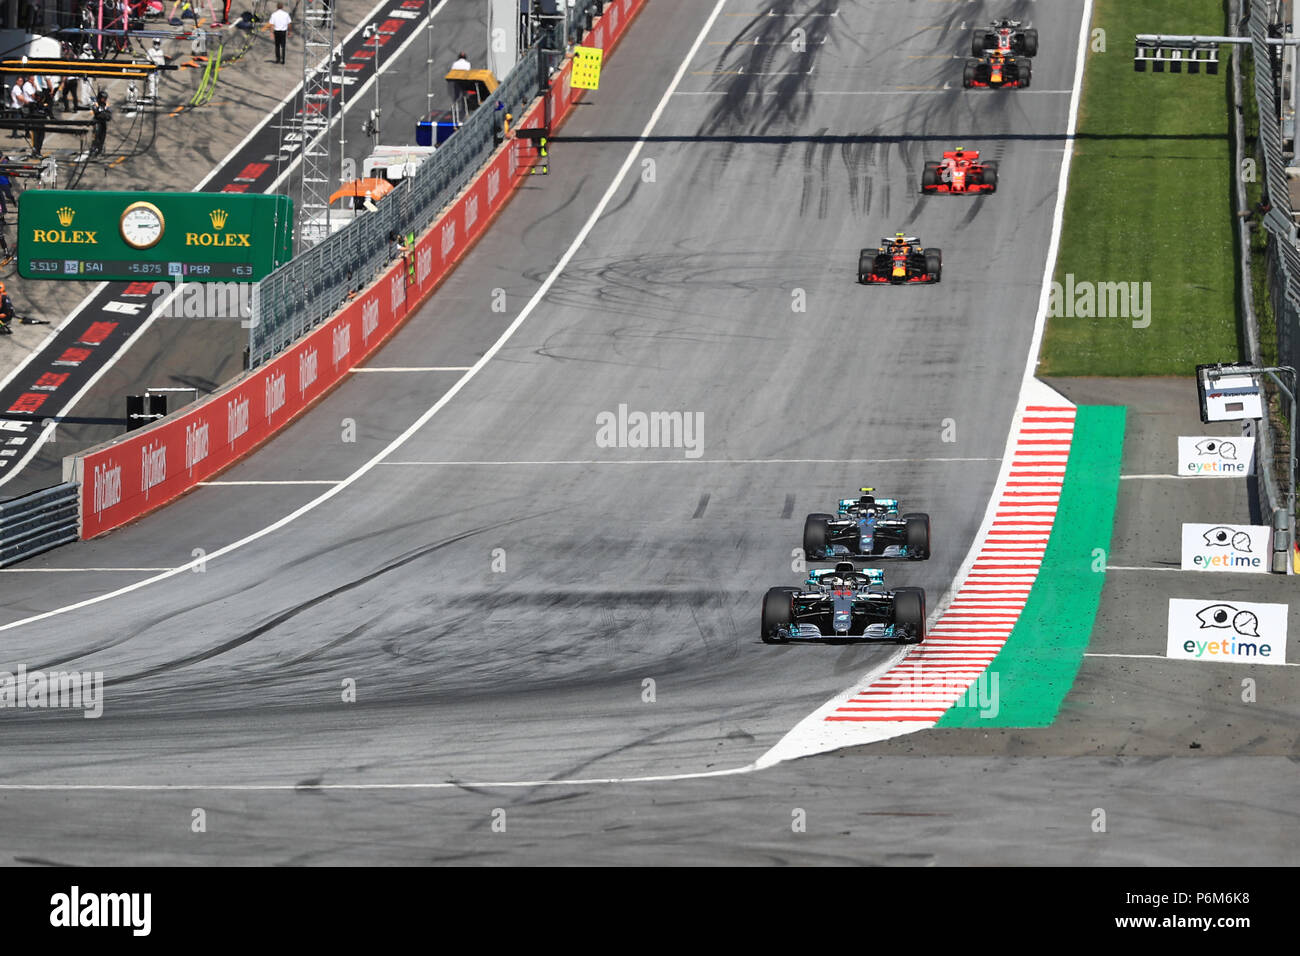 Red Bull Ring, Spielberg, Austria. 1st July, 2018. Austrian Formula One  Grand Prix, Sunday race day; Mercedes AMG Petronas Motorsport, Lewis  Hamilton leads on lap 2 ahead of Bottas who took back